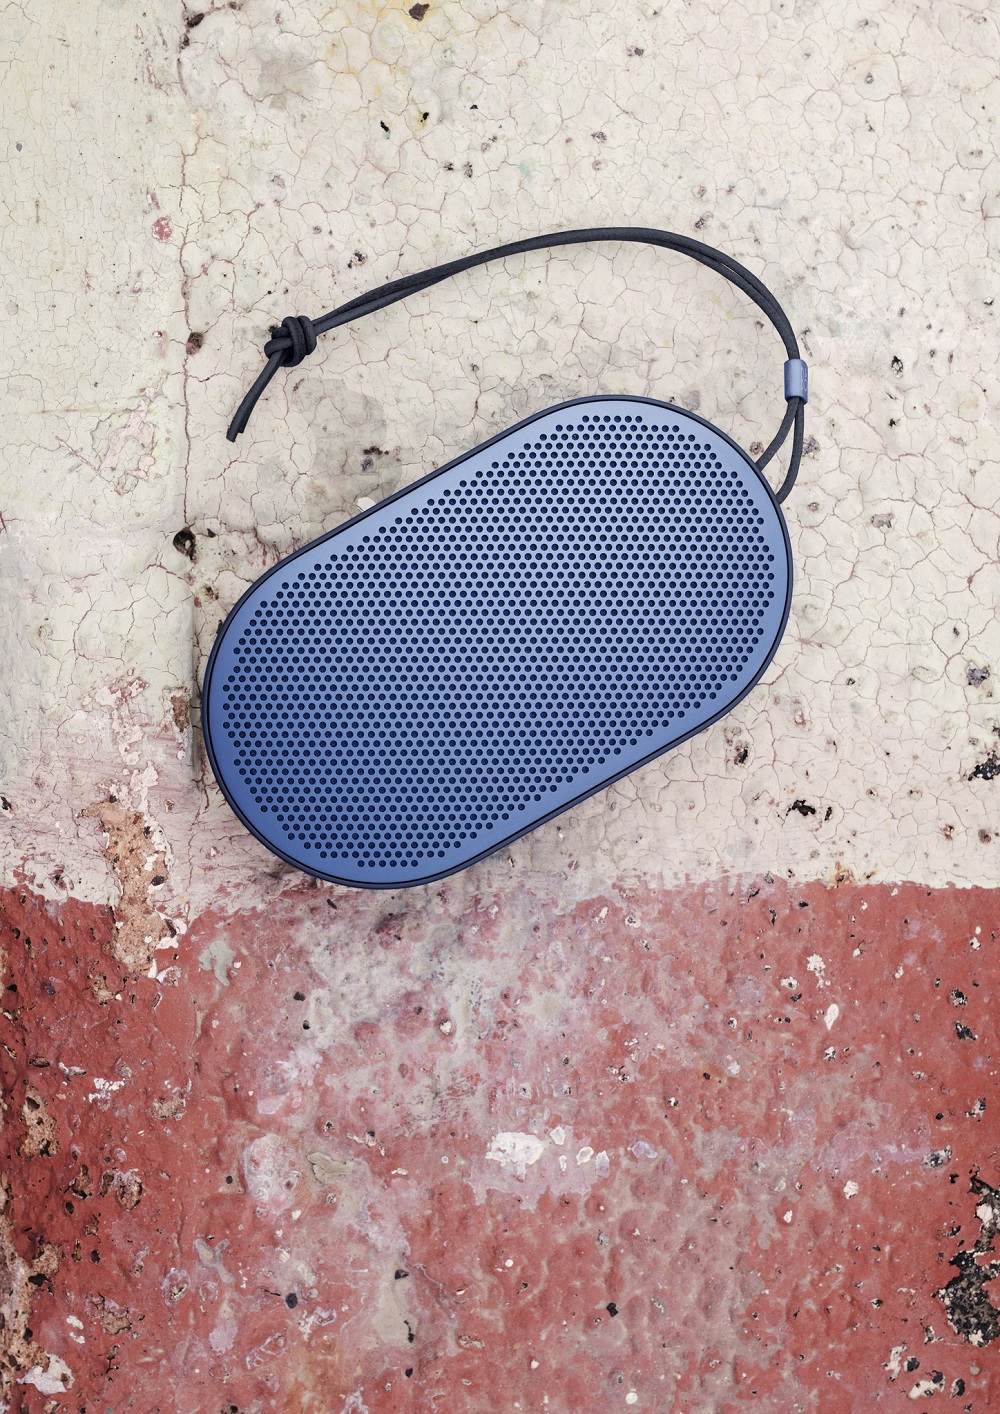 B&O PLAY Launches The Beoplay P2